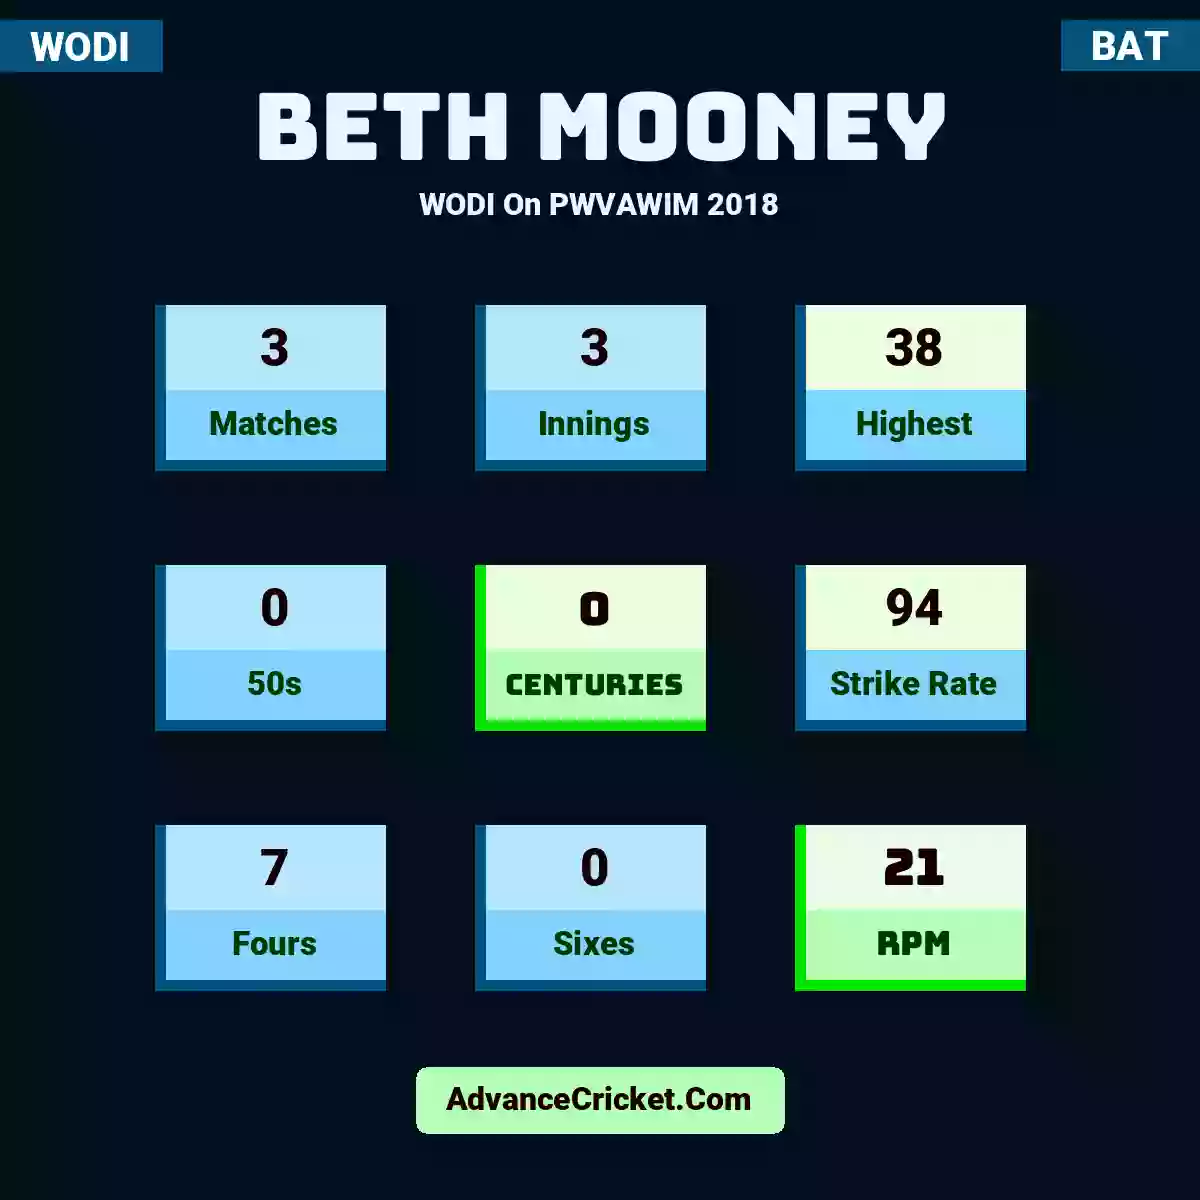 Beth Mooney WODI  On PWVAWIM 2018, Beth Mooney played 3 matches, scored 38 runs as highest, 0 half-centuries, and 0 centuries, with a strike rate of 94. B.Mooney hit 7 fours and 0 sixes, with an RPM of 21.